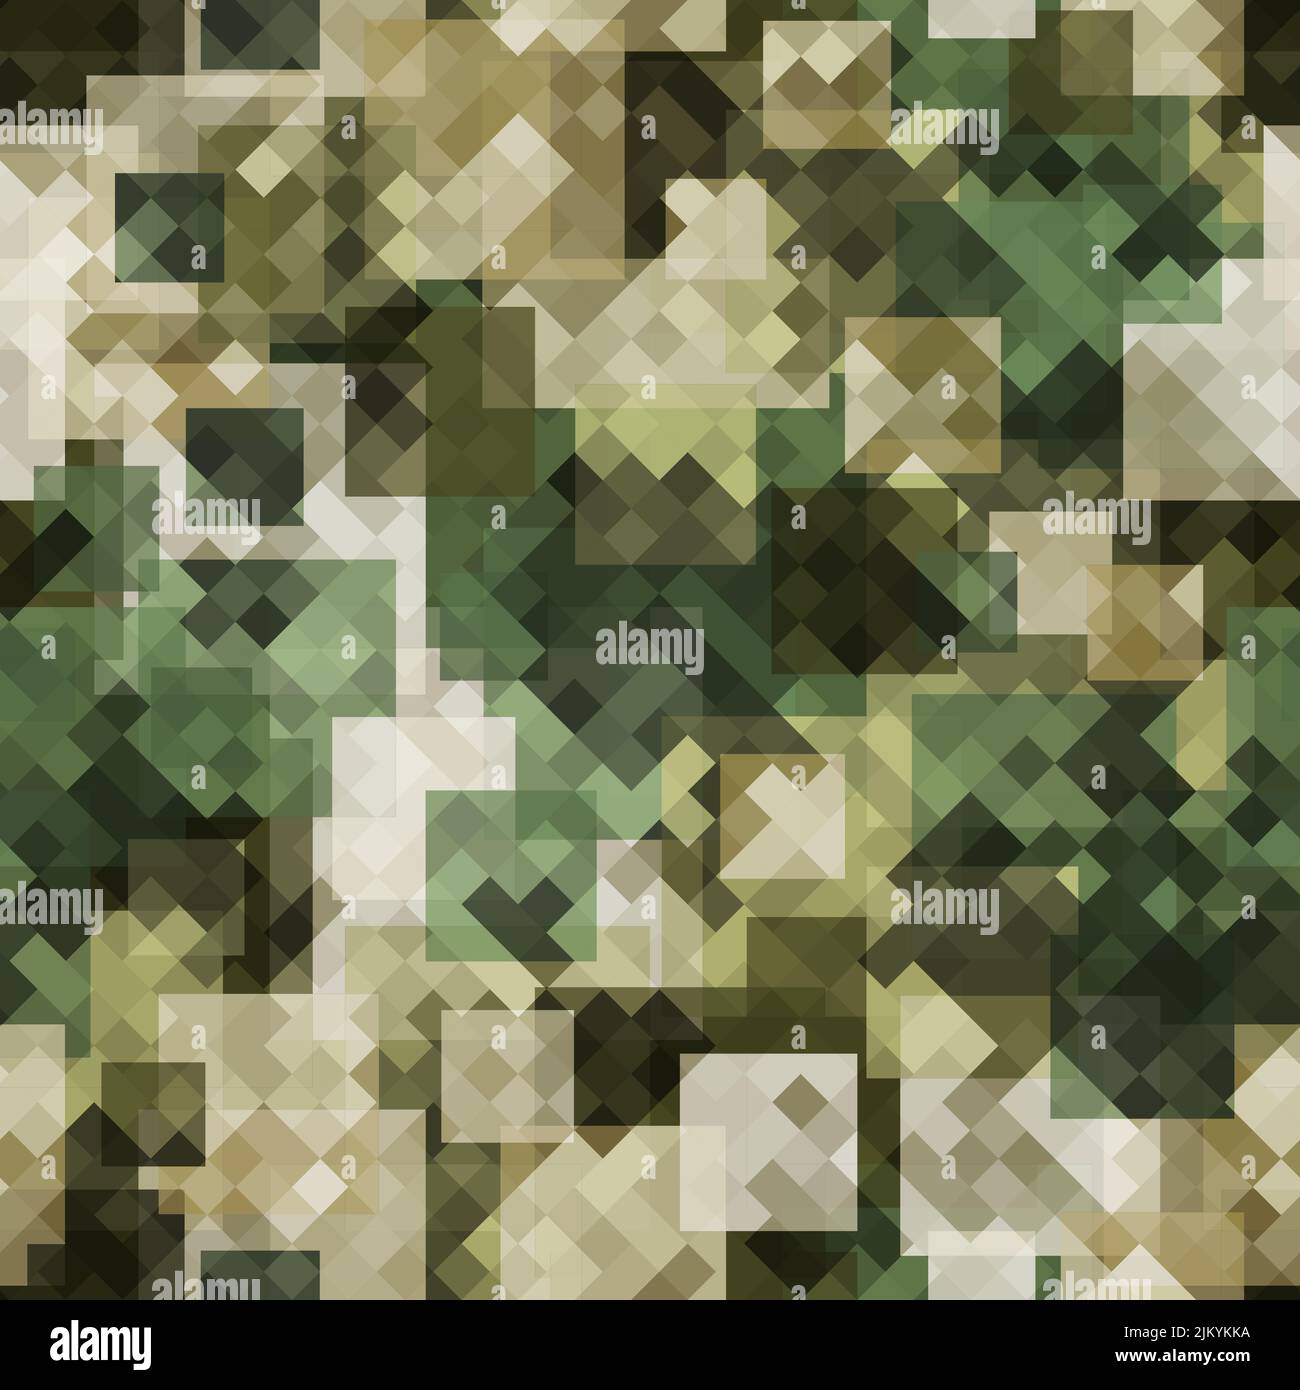 Texture military camouflage seamless pattern. Abstract army vector illustration Stock Vector